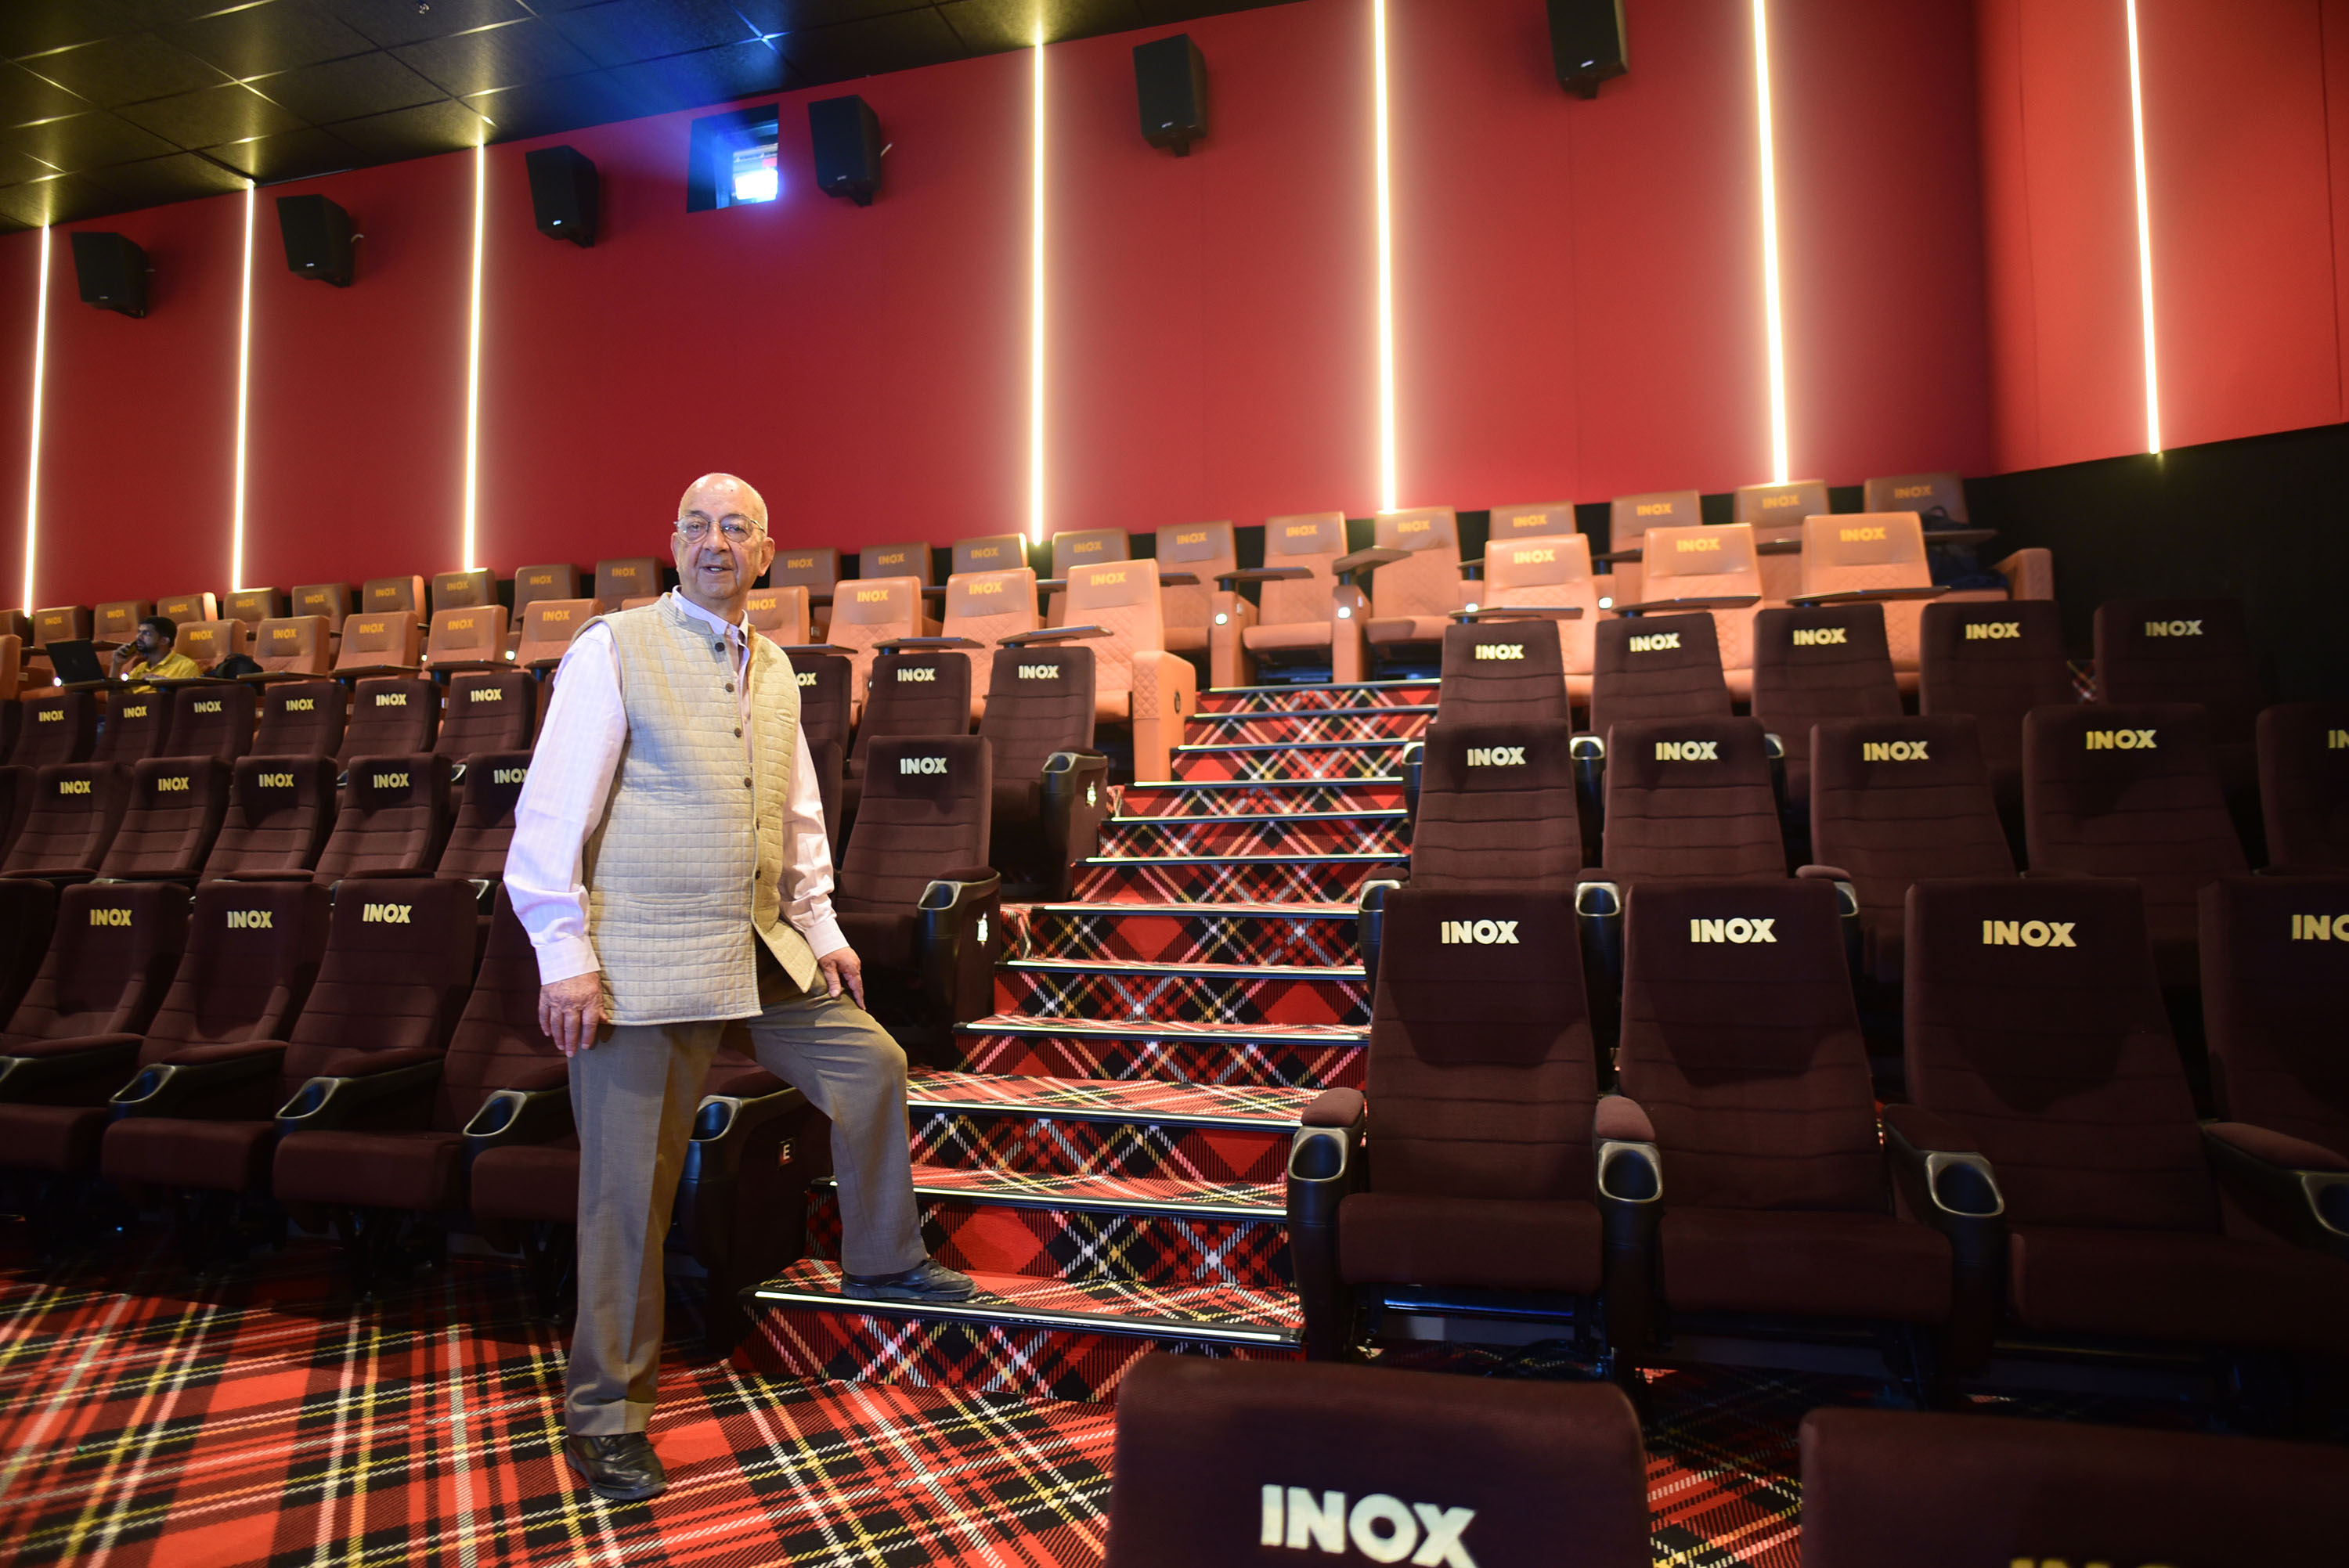 Educationist Vijay Dhar ahead of the inauguration of INOX multiplex comprising three cinema auditoriums with a capacity of 520 seats on September 19, 2022, in Srinagar, India. Image: Waseem Andrabi/Hindustan Times via Getty Images